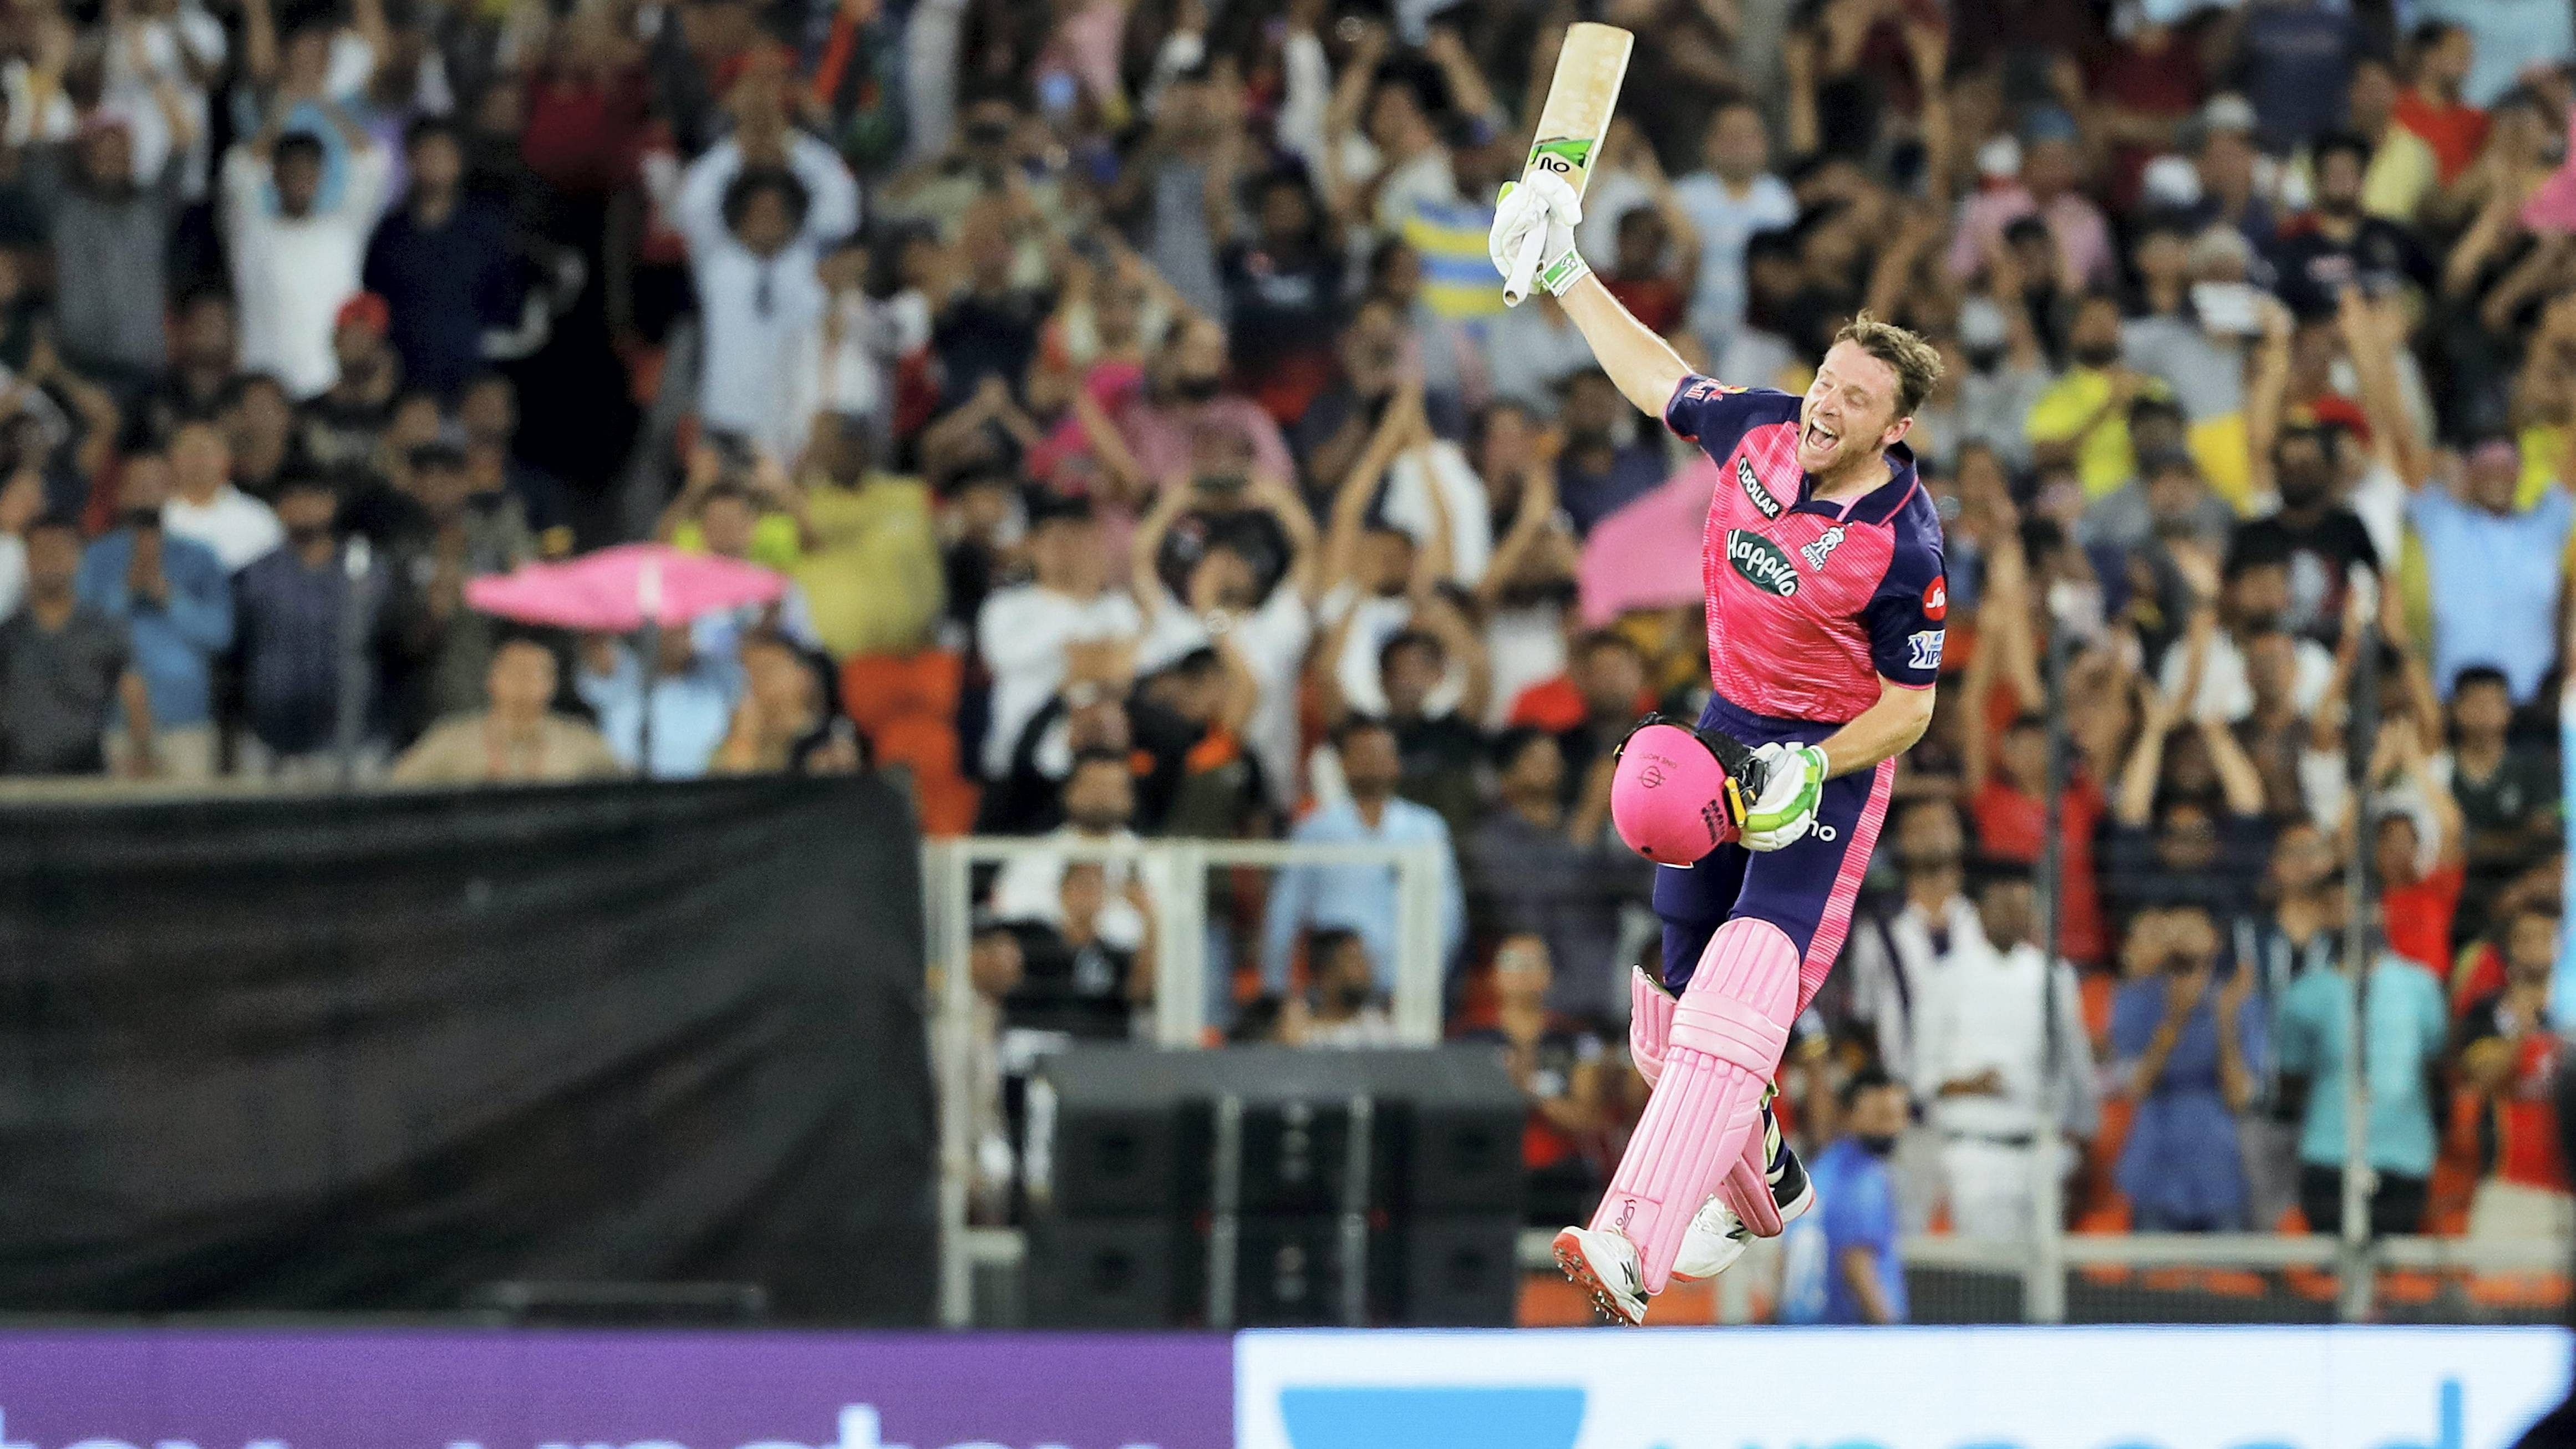 Rajasthan rode on Buttler's record-equalling fourth century of the tournament to hammer Virat Kohli's Royal Challengers Bangalore by seven wickets and book a title clash with Gujarat Titans. Credit: PTI Photo